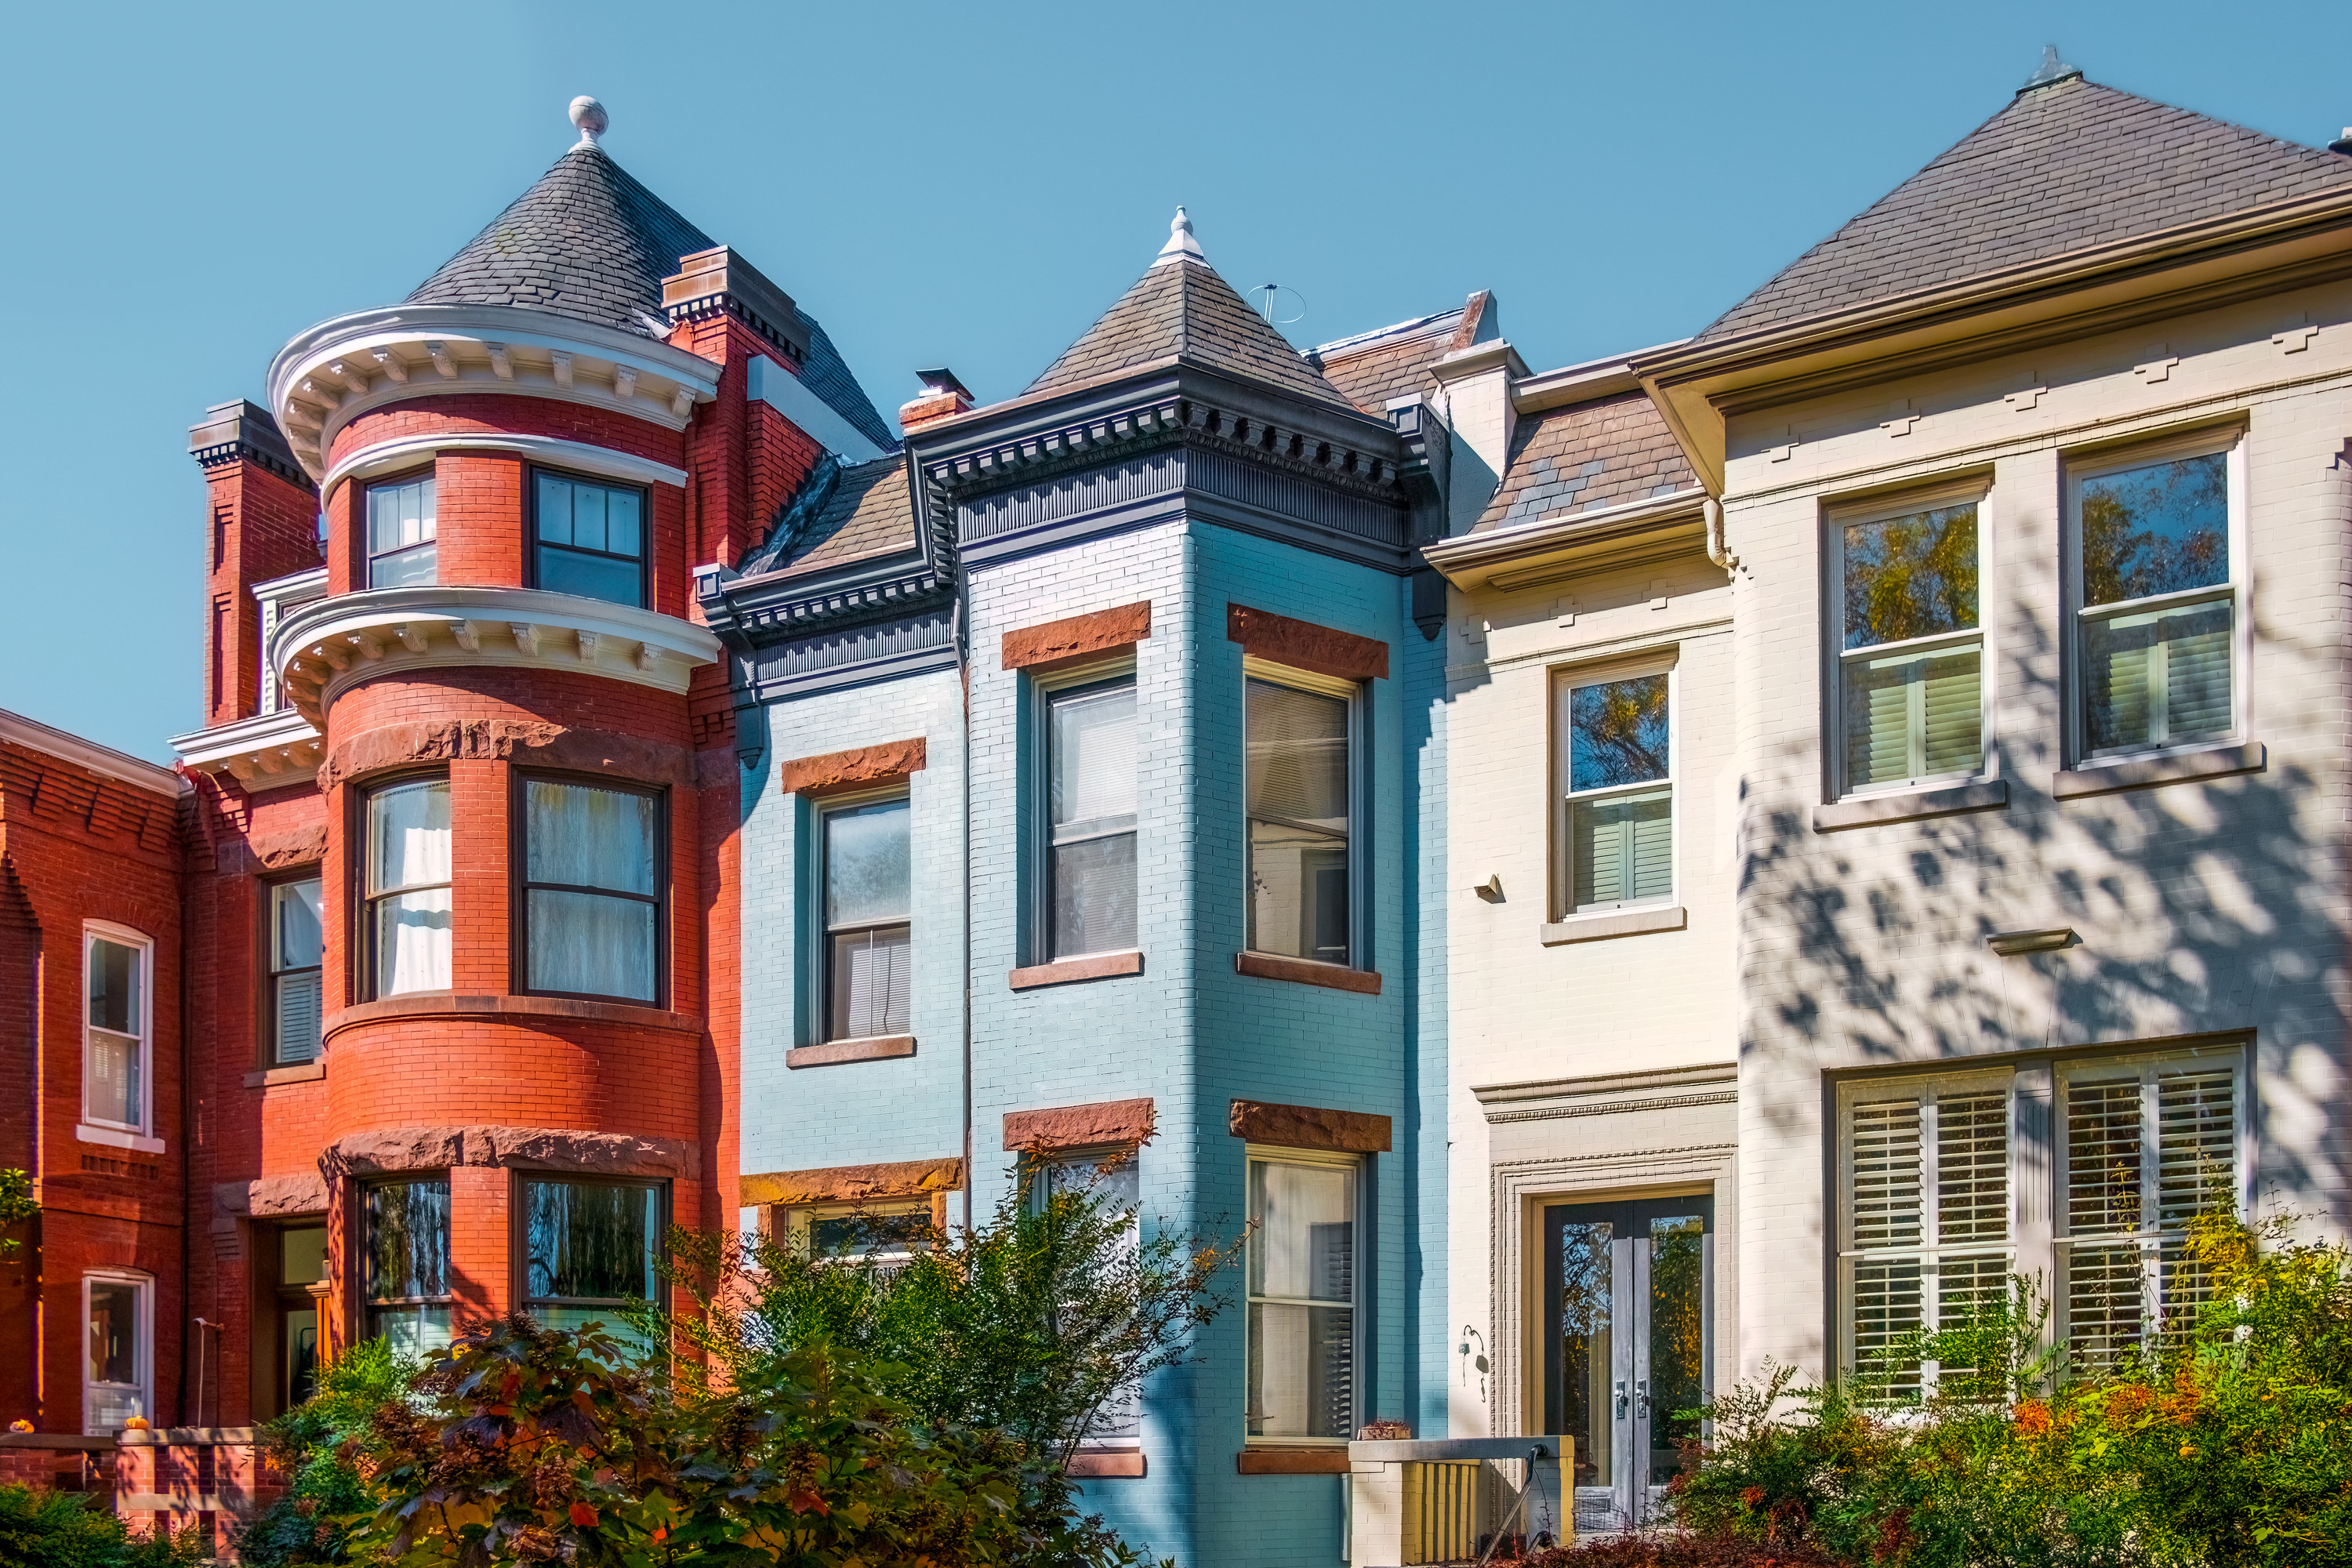 Close-up of a row of townhouses in Capitol Hill neighborhood of Washington, DC